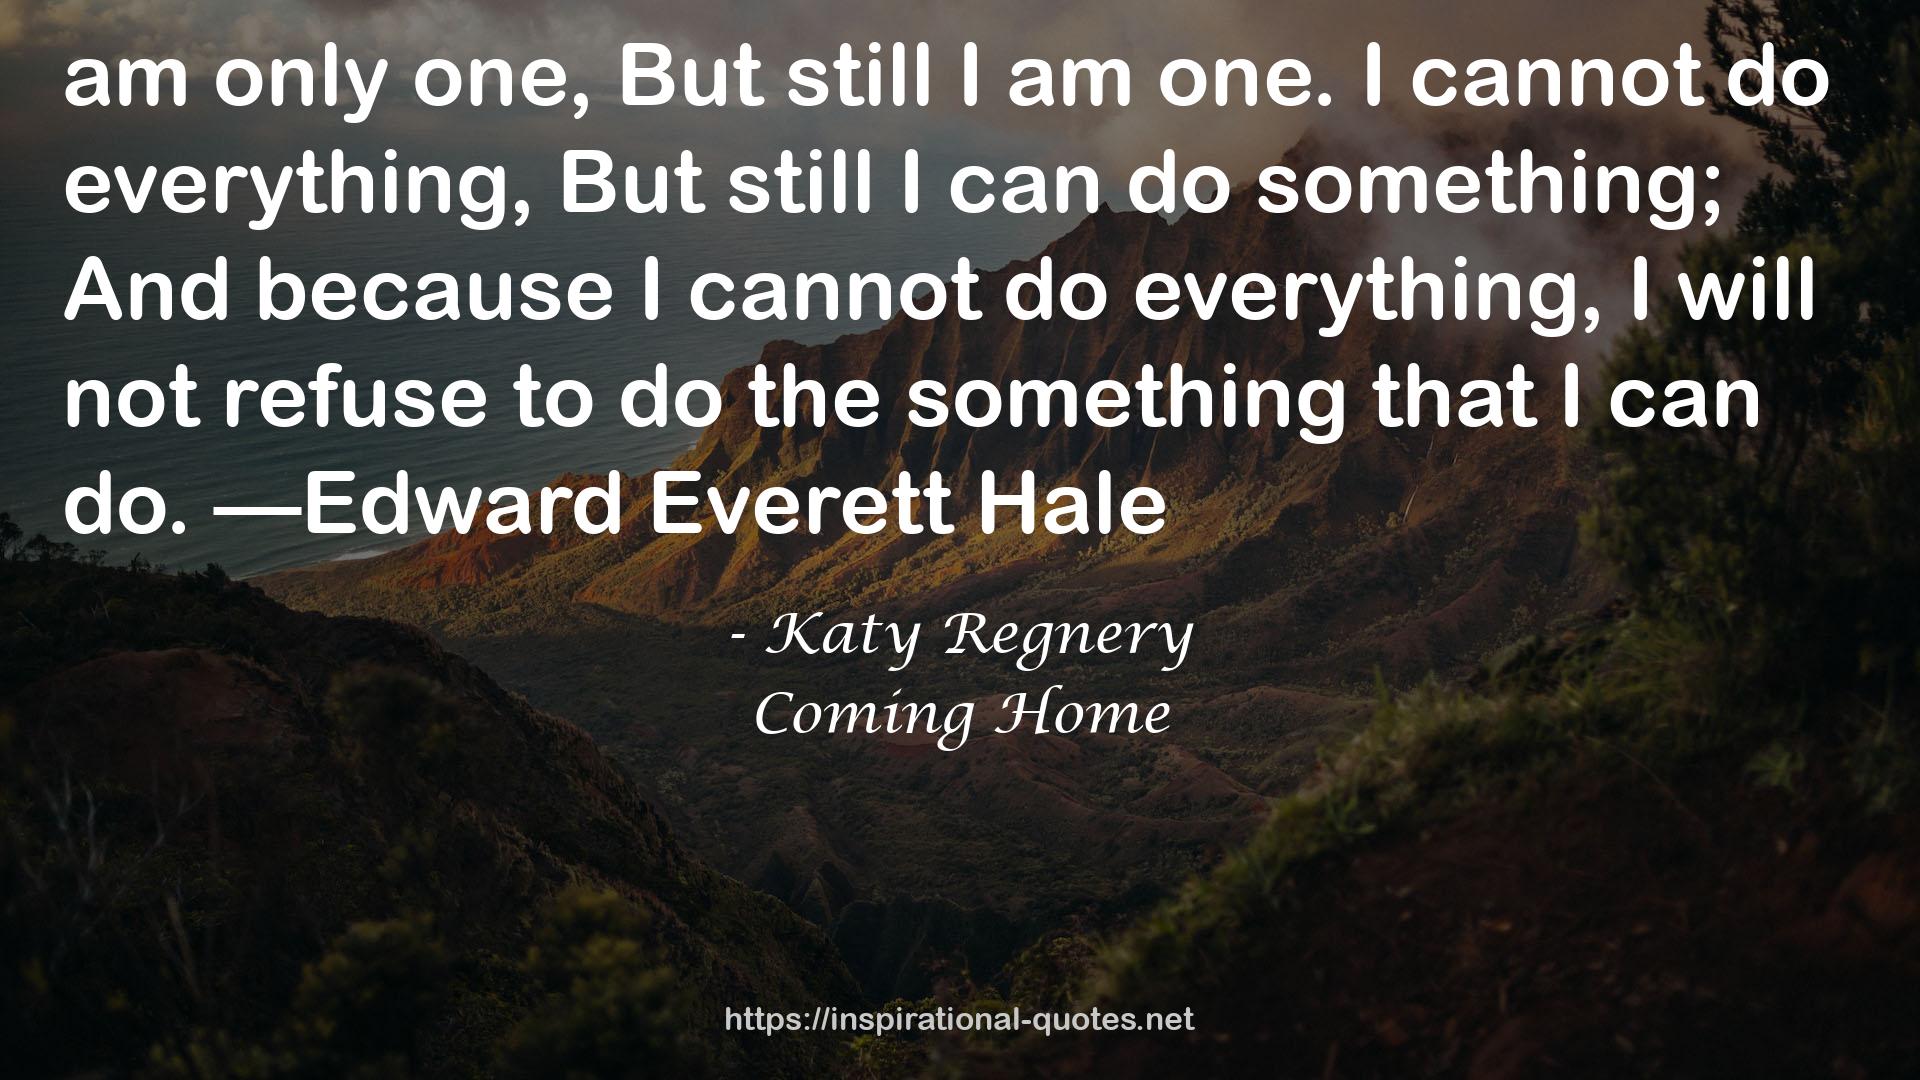 Coming Home QUOTES